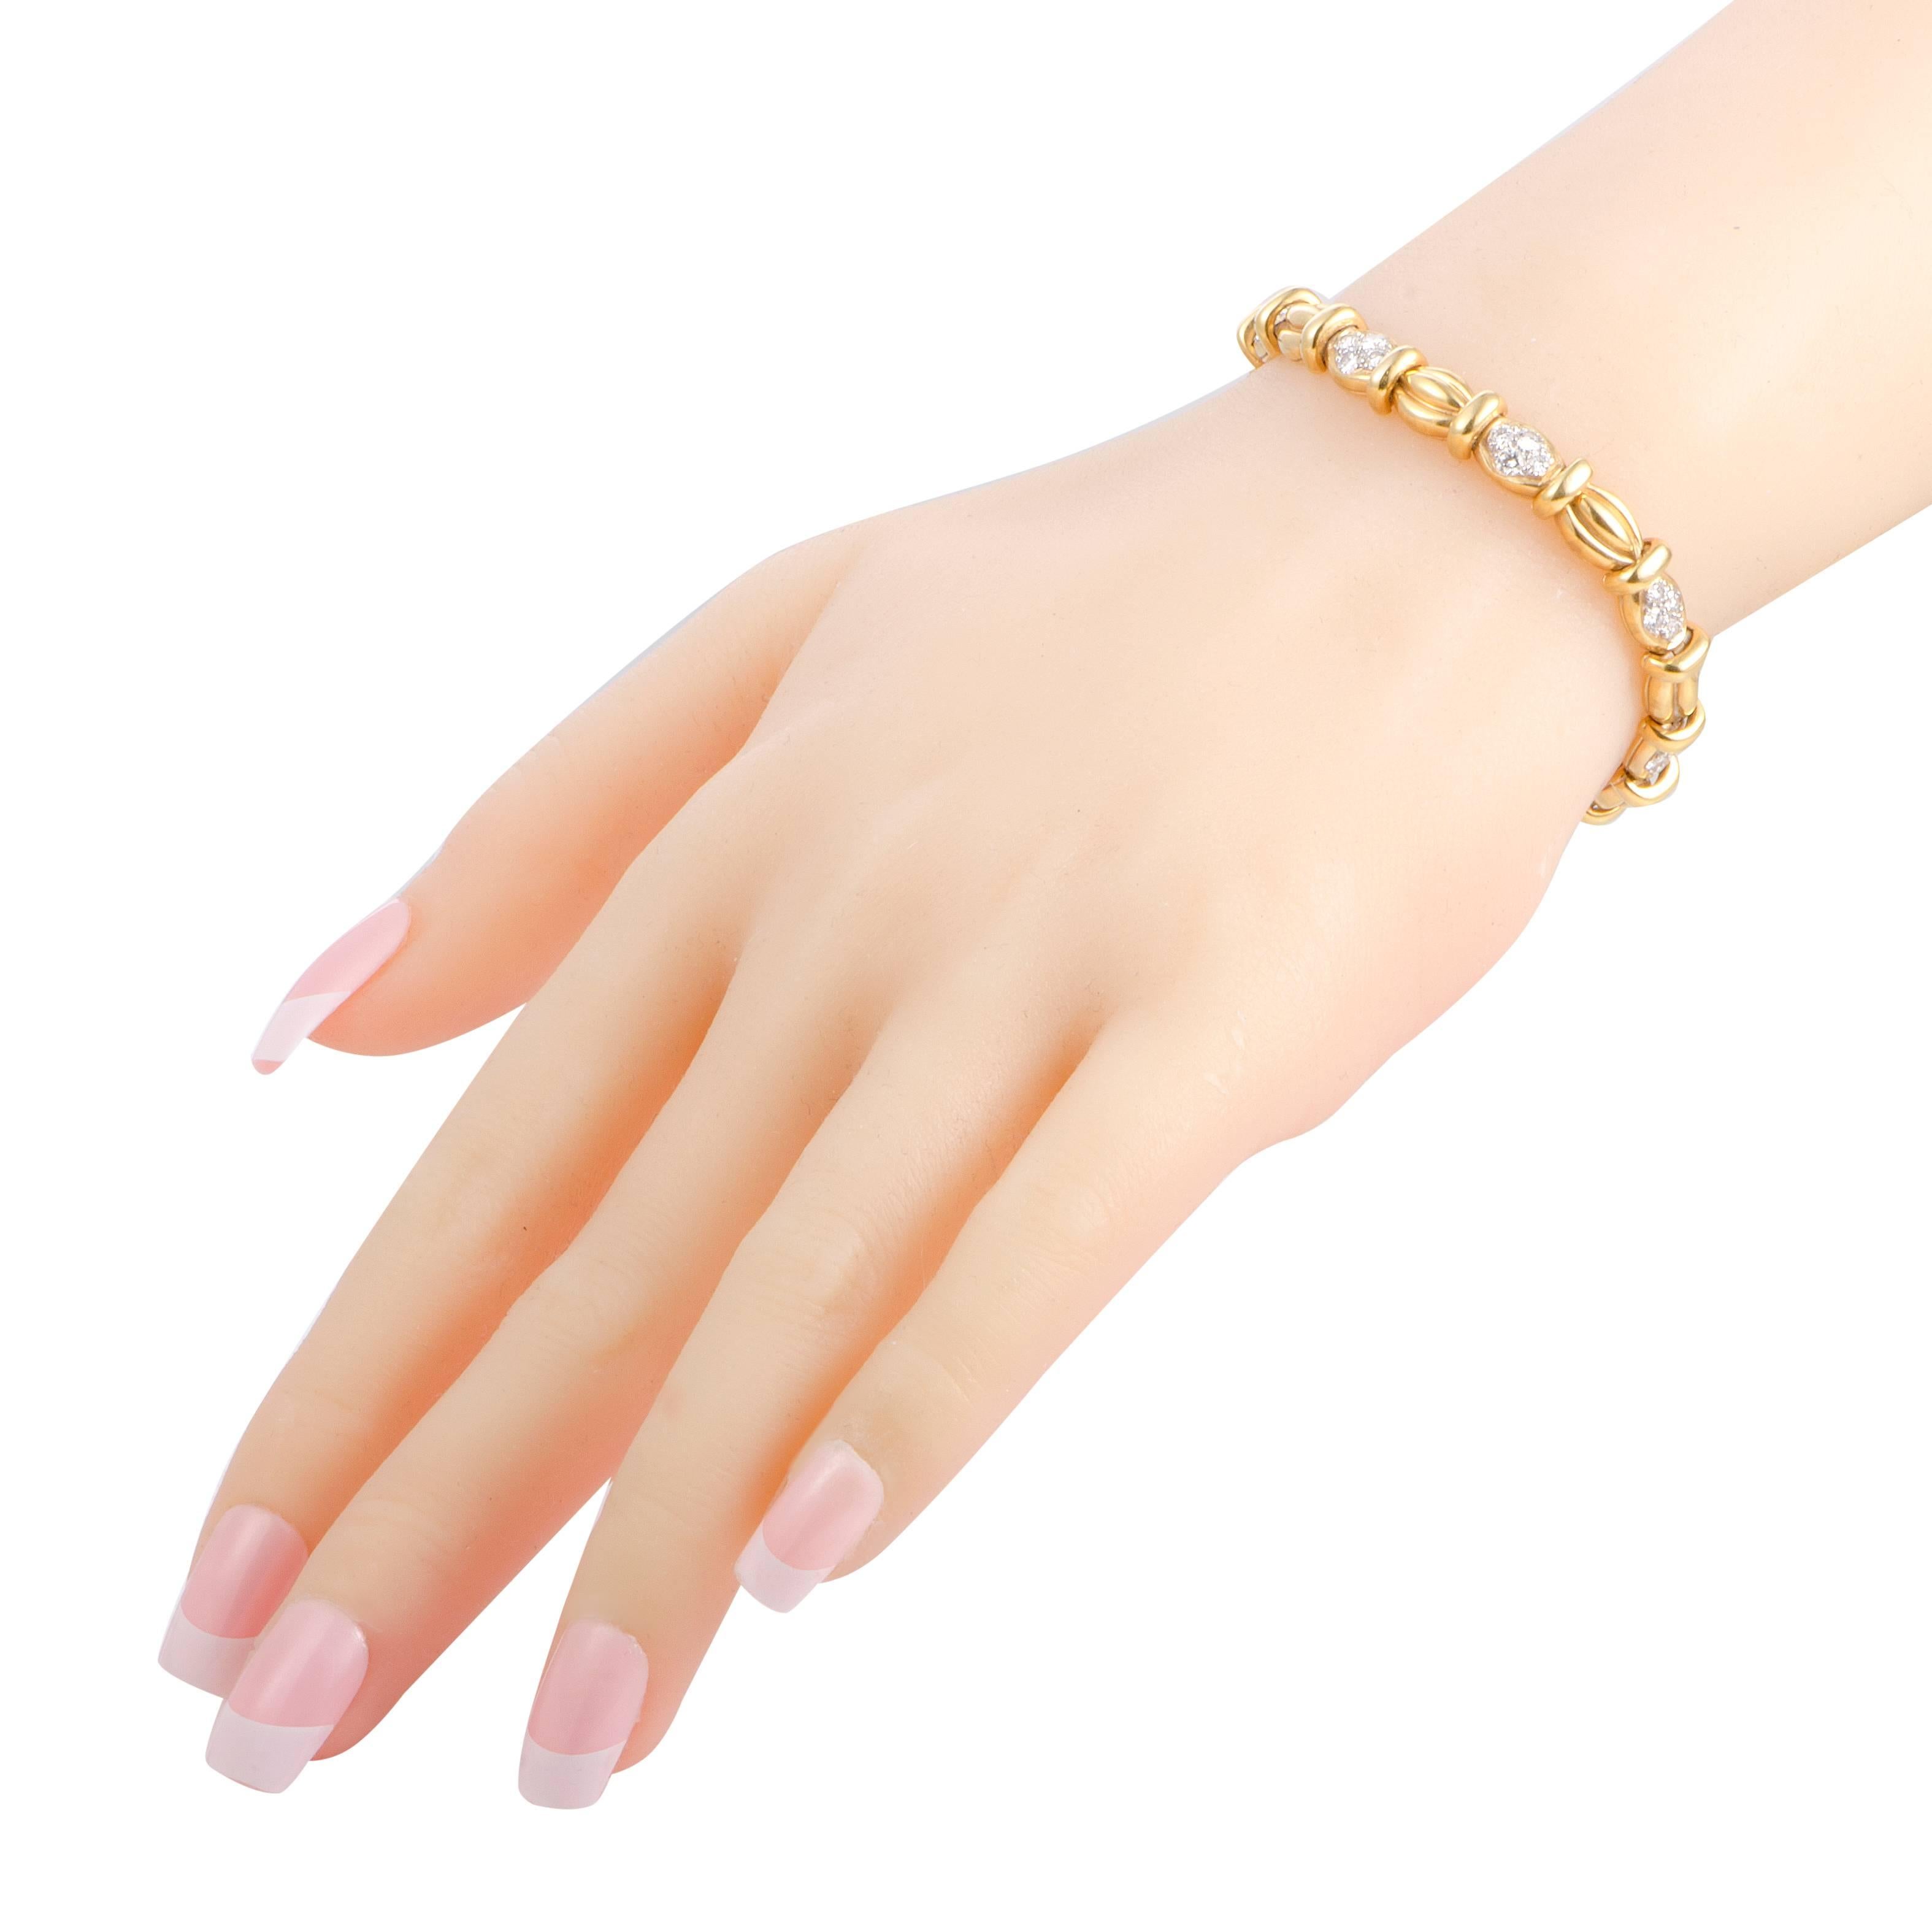 Slightly reminiscent of the ever-sophisticated vintage pieces, this splendid Van Cleef & Arpels bracelet offers a look of timeless elegance and prestige. The bracelet is made of radiant 18K yellow gold and decorated with scintillating diamond stones